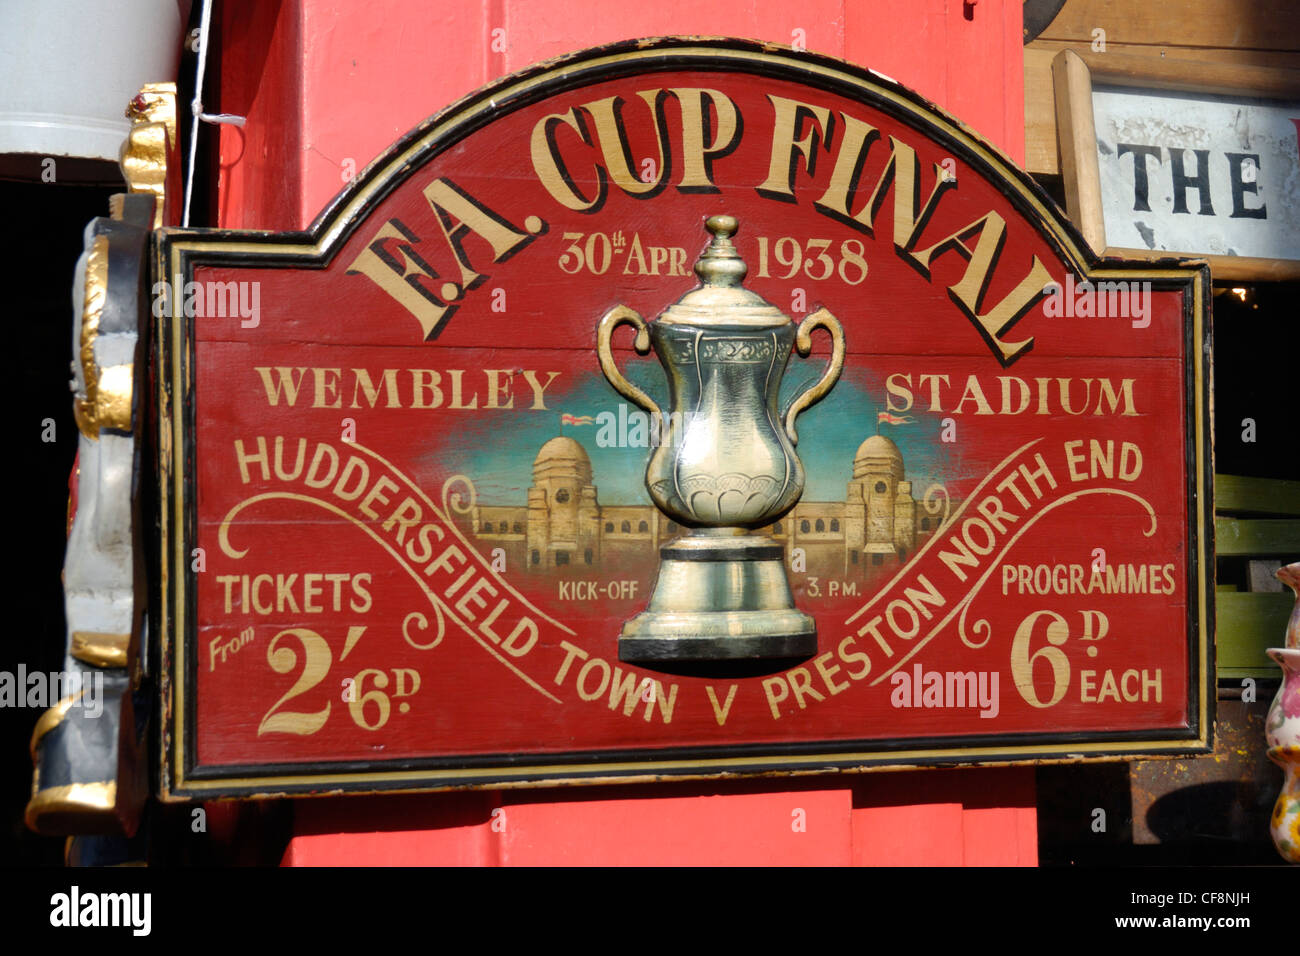 Antique ‘ F. A. Cup Final ‘ sign, London, England Stock Photo